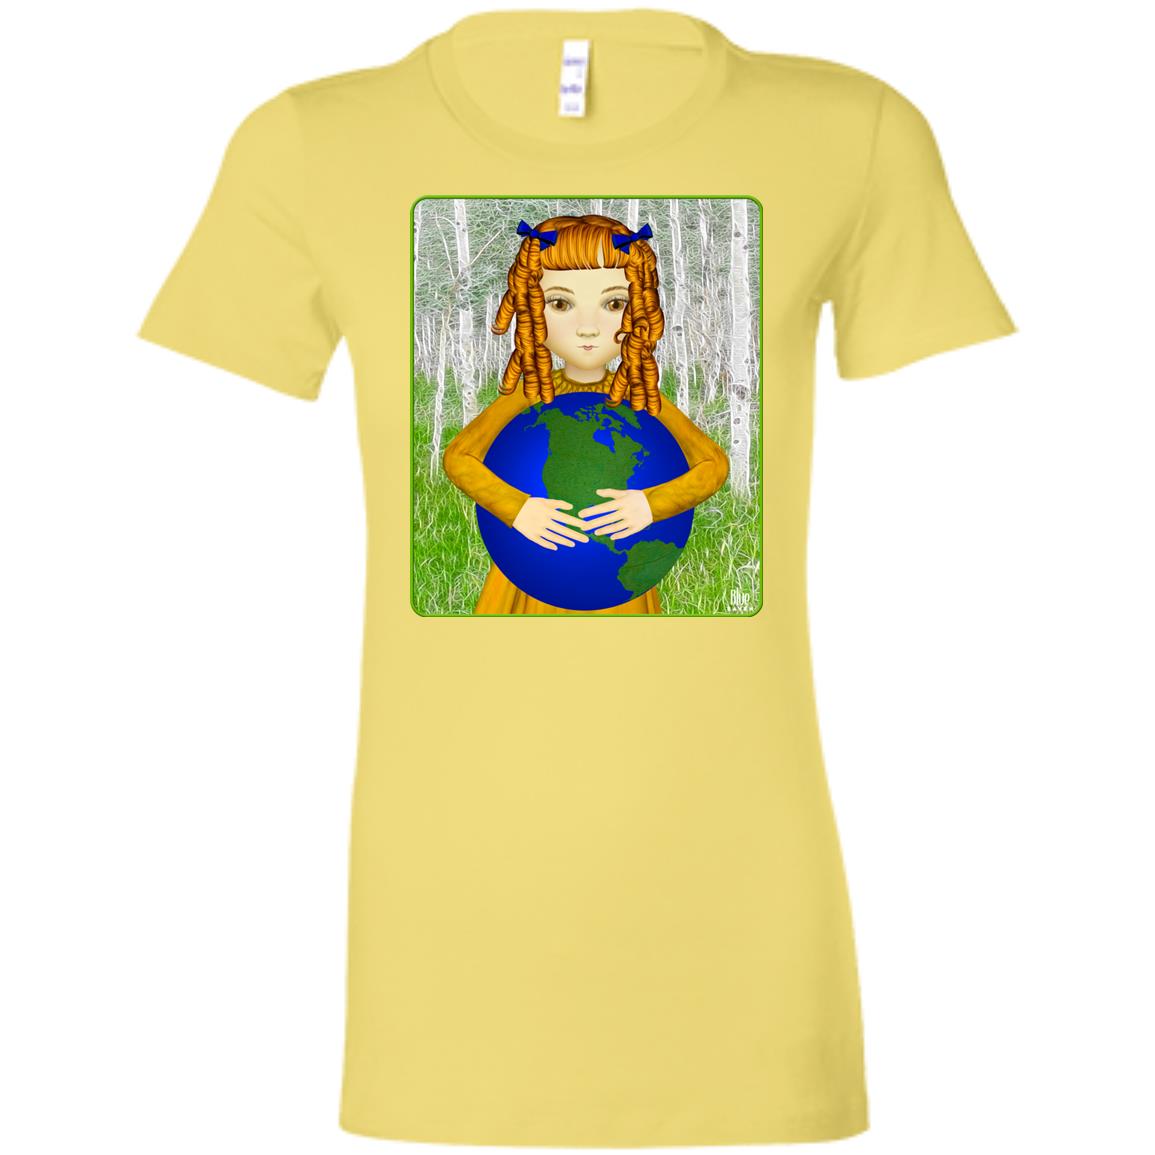 Save My World - Women's Fitted T-Shirt